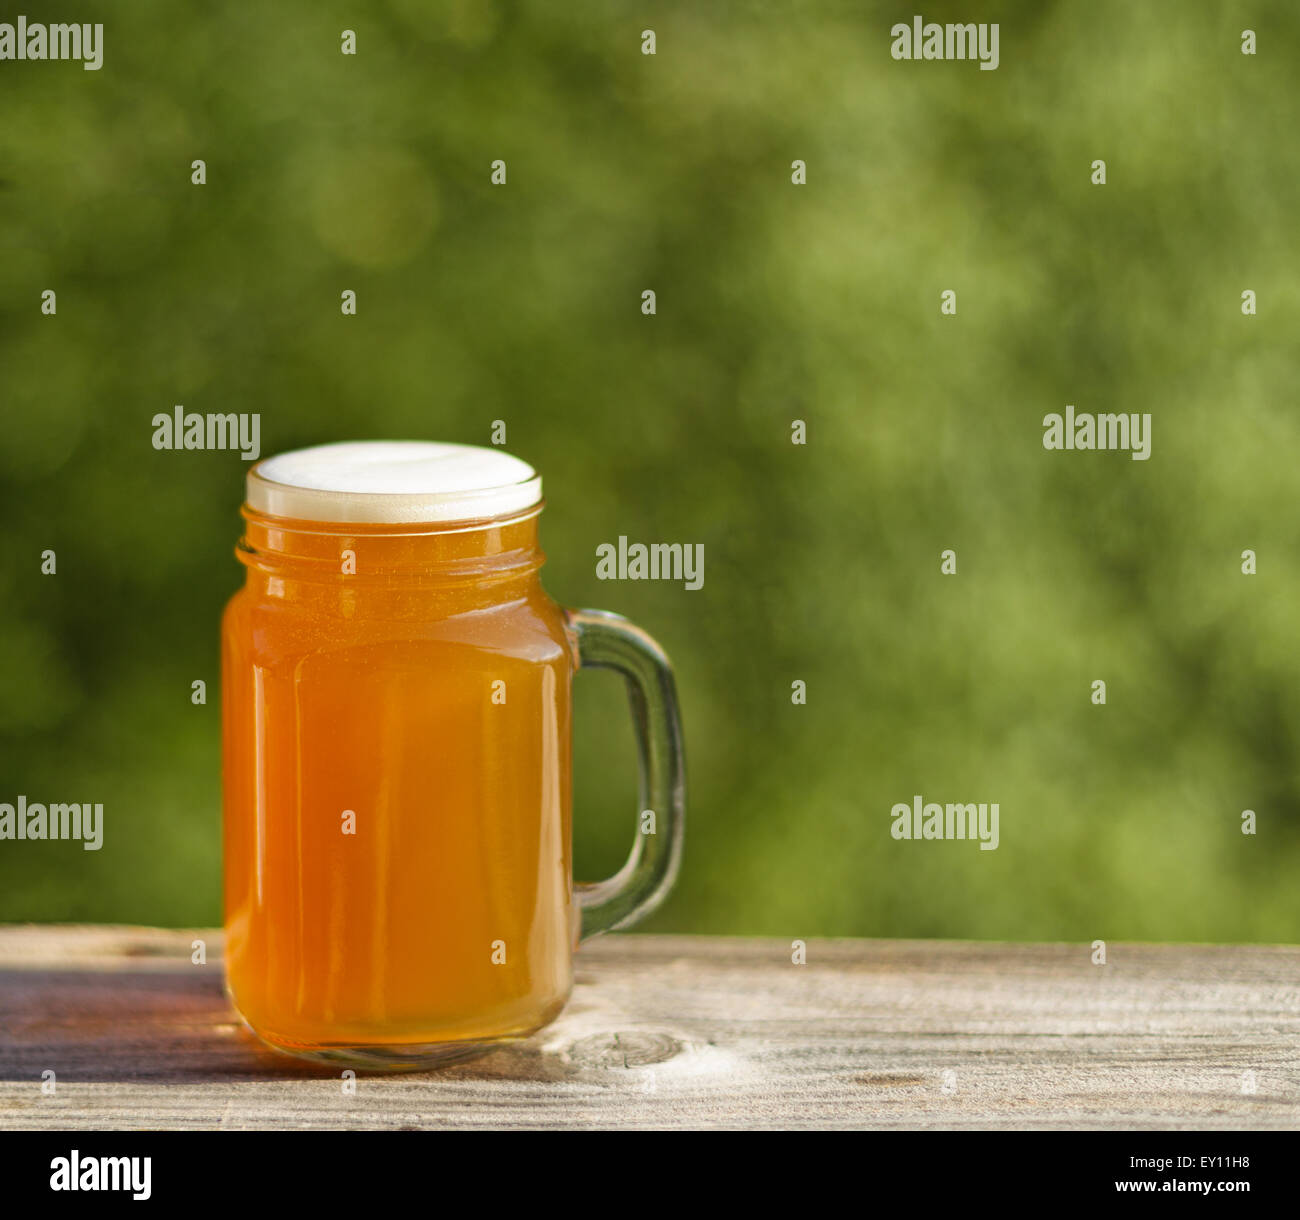 Pint of golden beer on rustic wood with blurred out green trees in background. Freshly poured to enjoy the outdoors. Stock Photo